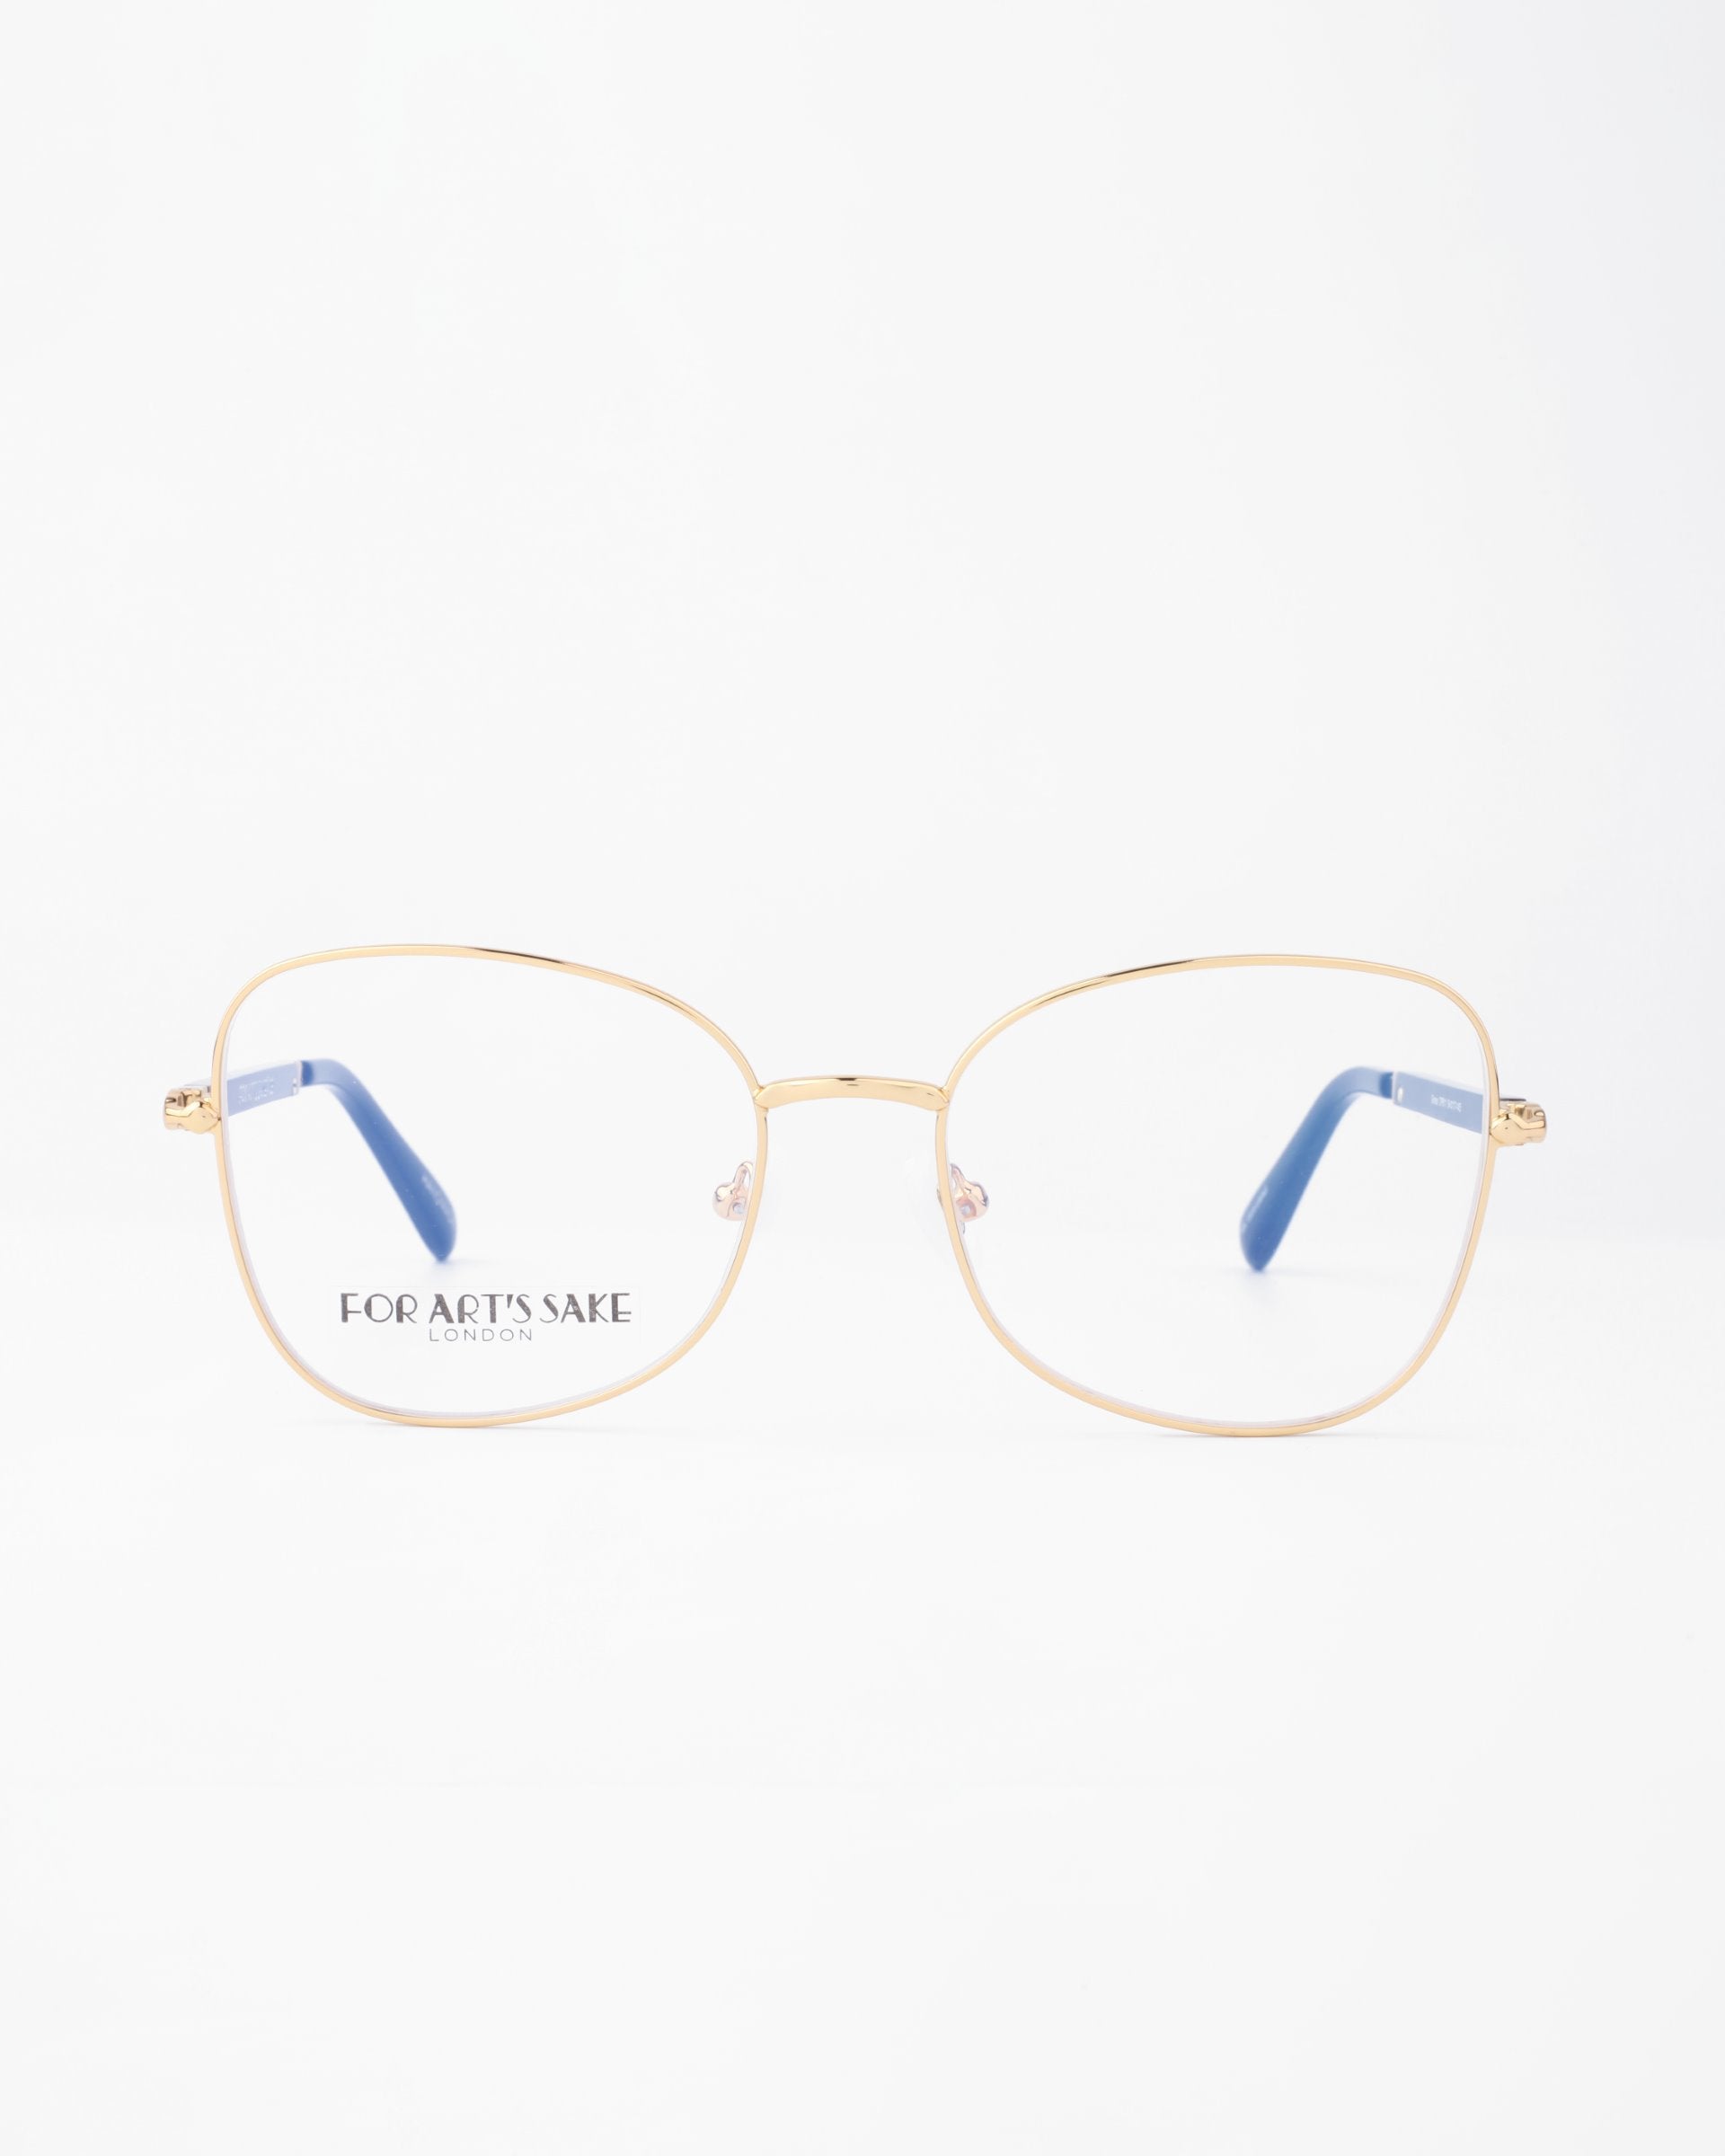 A pair of stylish Grace prescription glasses with thin, 18-karat gold-plated metal frames and square lenses. The temples are blue with &quot;For Art&#39;s Sake®&quot; printed on the left lens. The background is plain white.